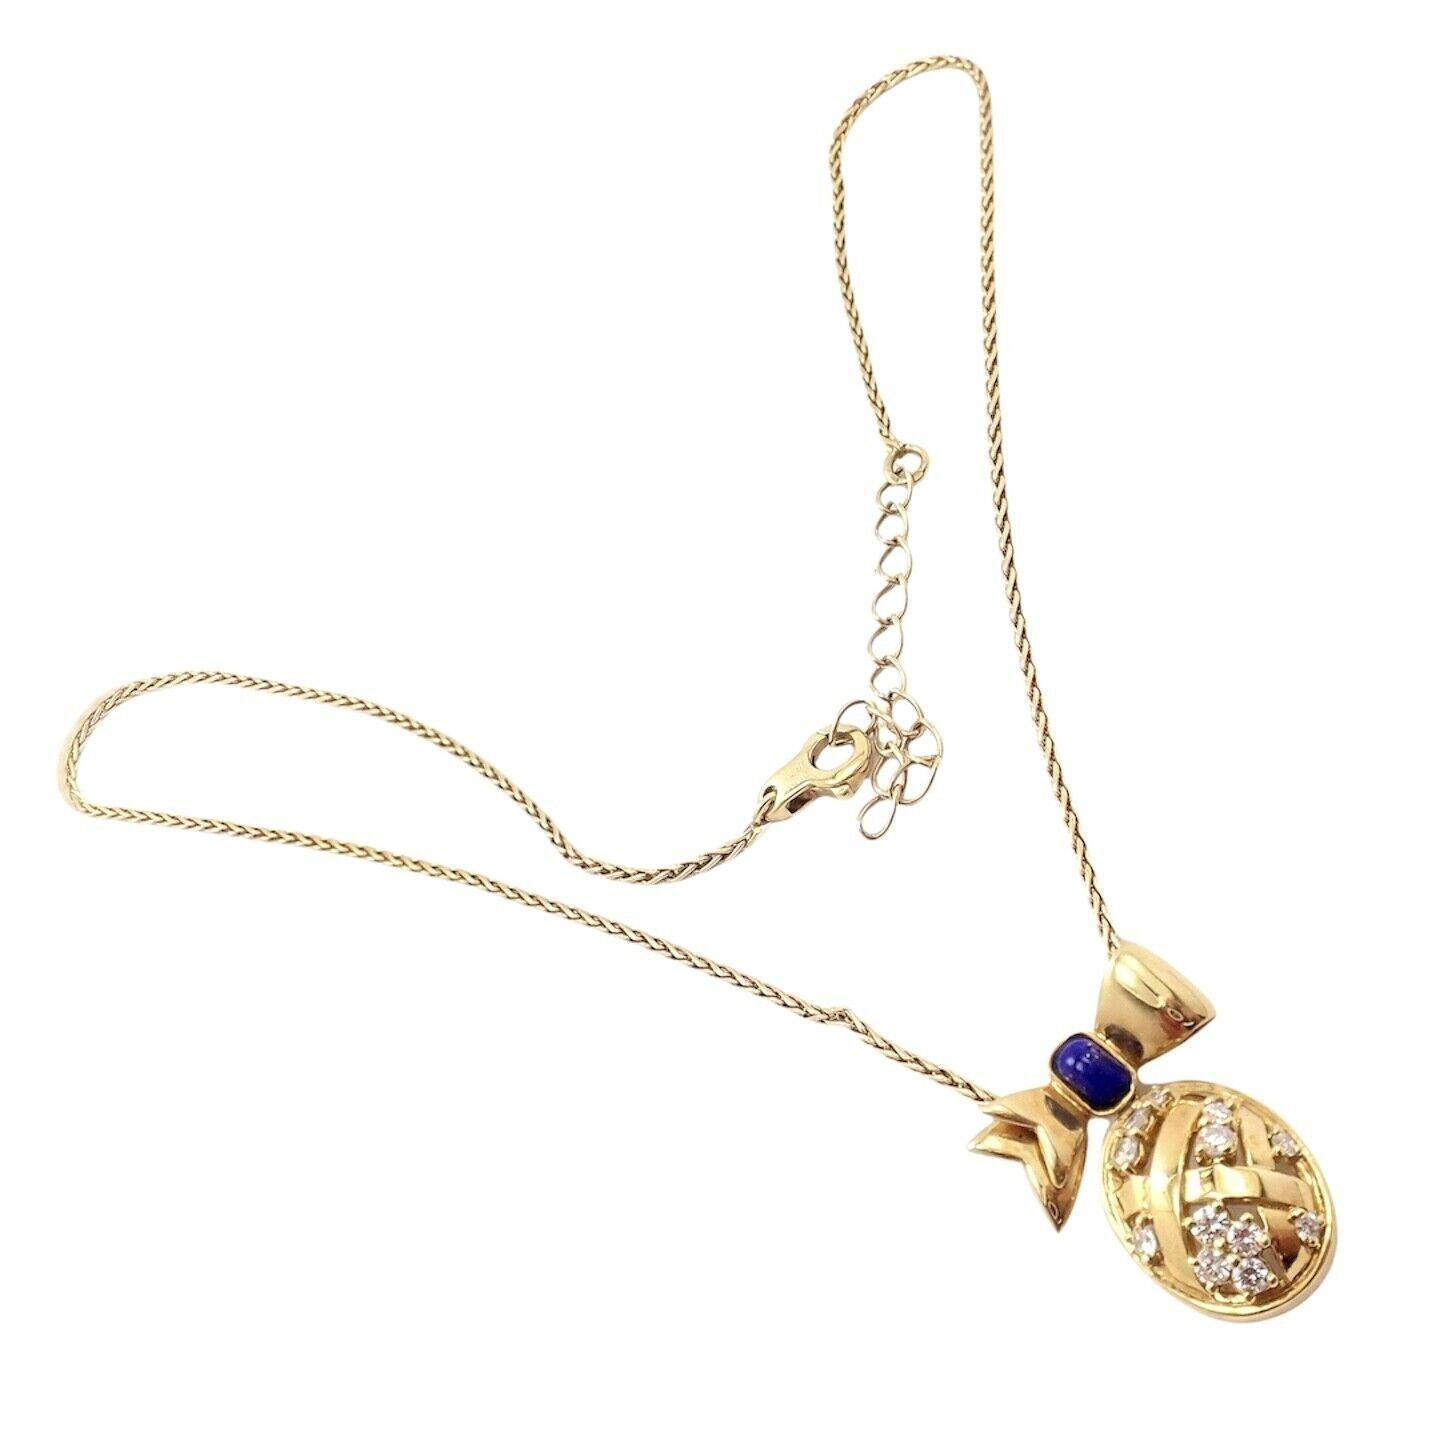 18k Yellow Gold Diamond Bow Pendant Necklace by Christian Dior. 
With 12x round brilliant cut diamonds VVS1 clarity, E color total weight approx. .50ct
1x Lapis 3.3mm x 5mm
Details: 
Weight: 10.7 grams
Length Adjustable: 16